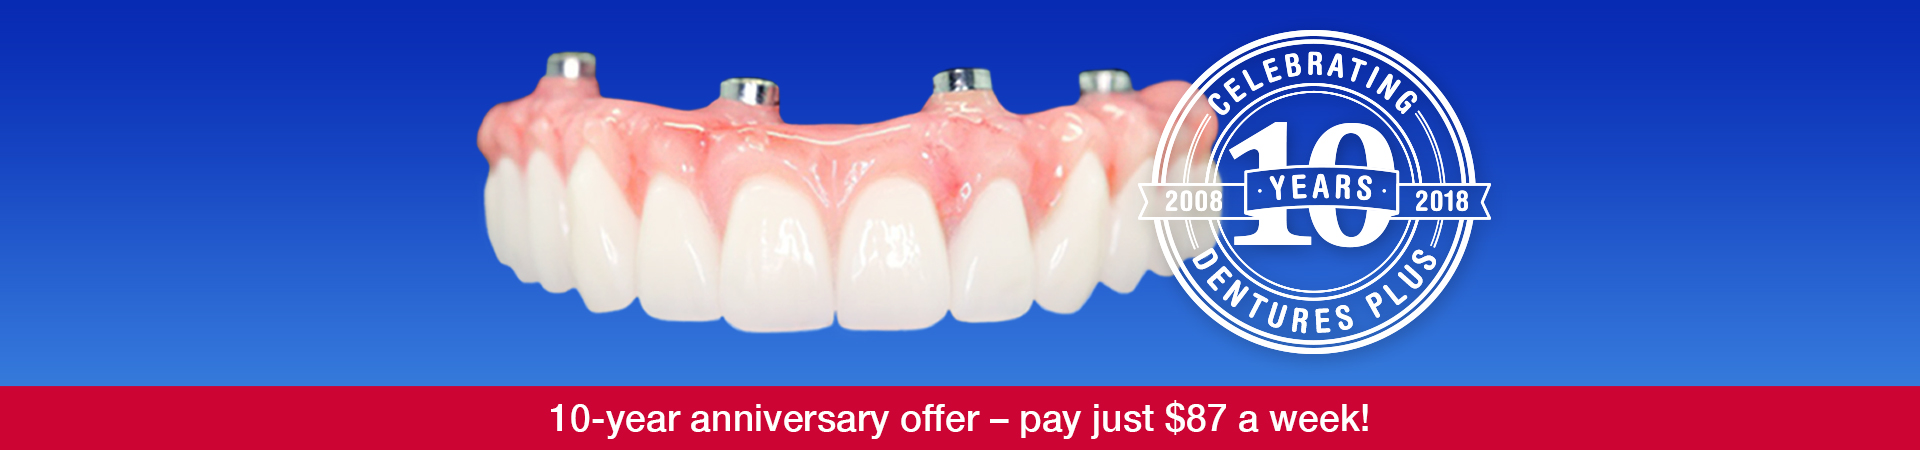 Full Arch Rehab on four dental implants (Four Under One) – special 10th anniversary special from just 16k!